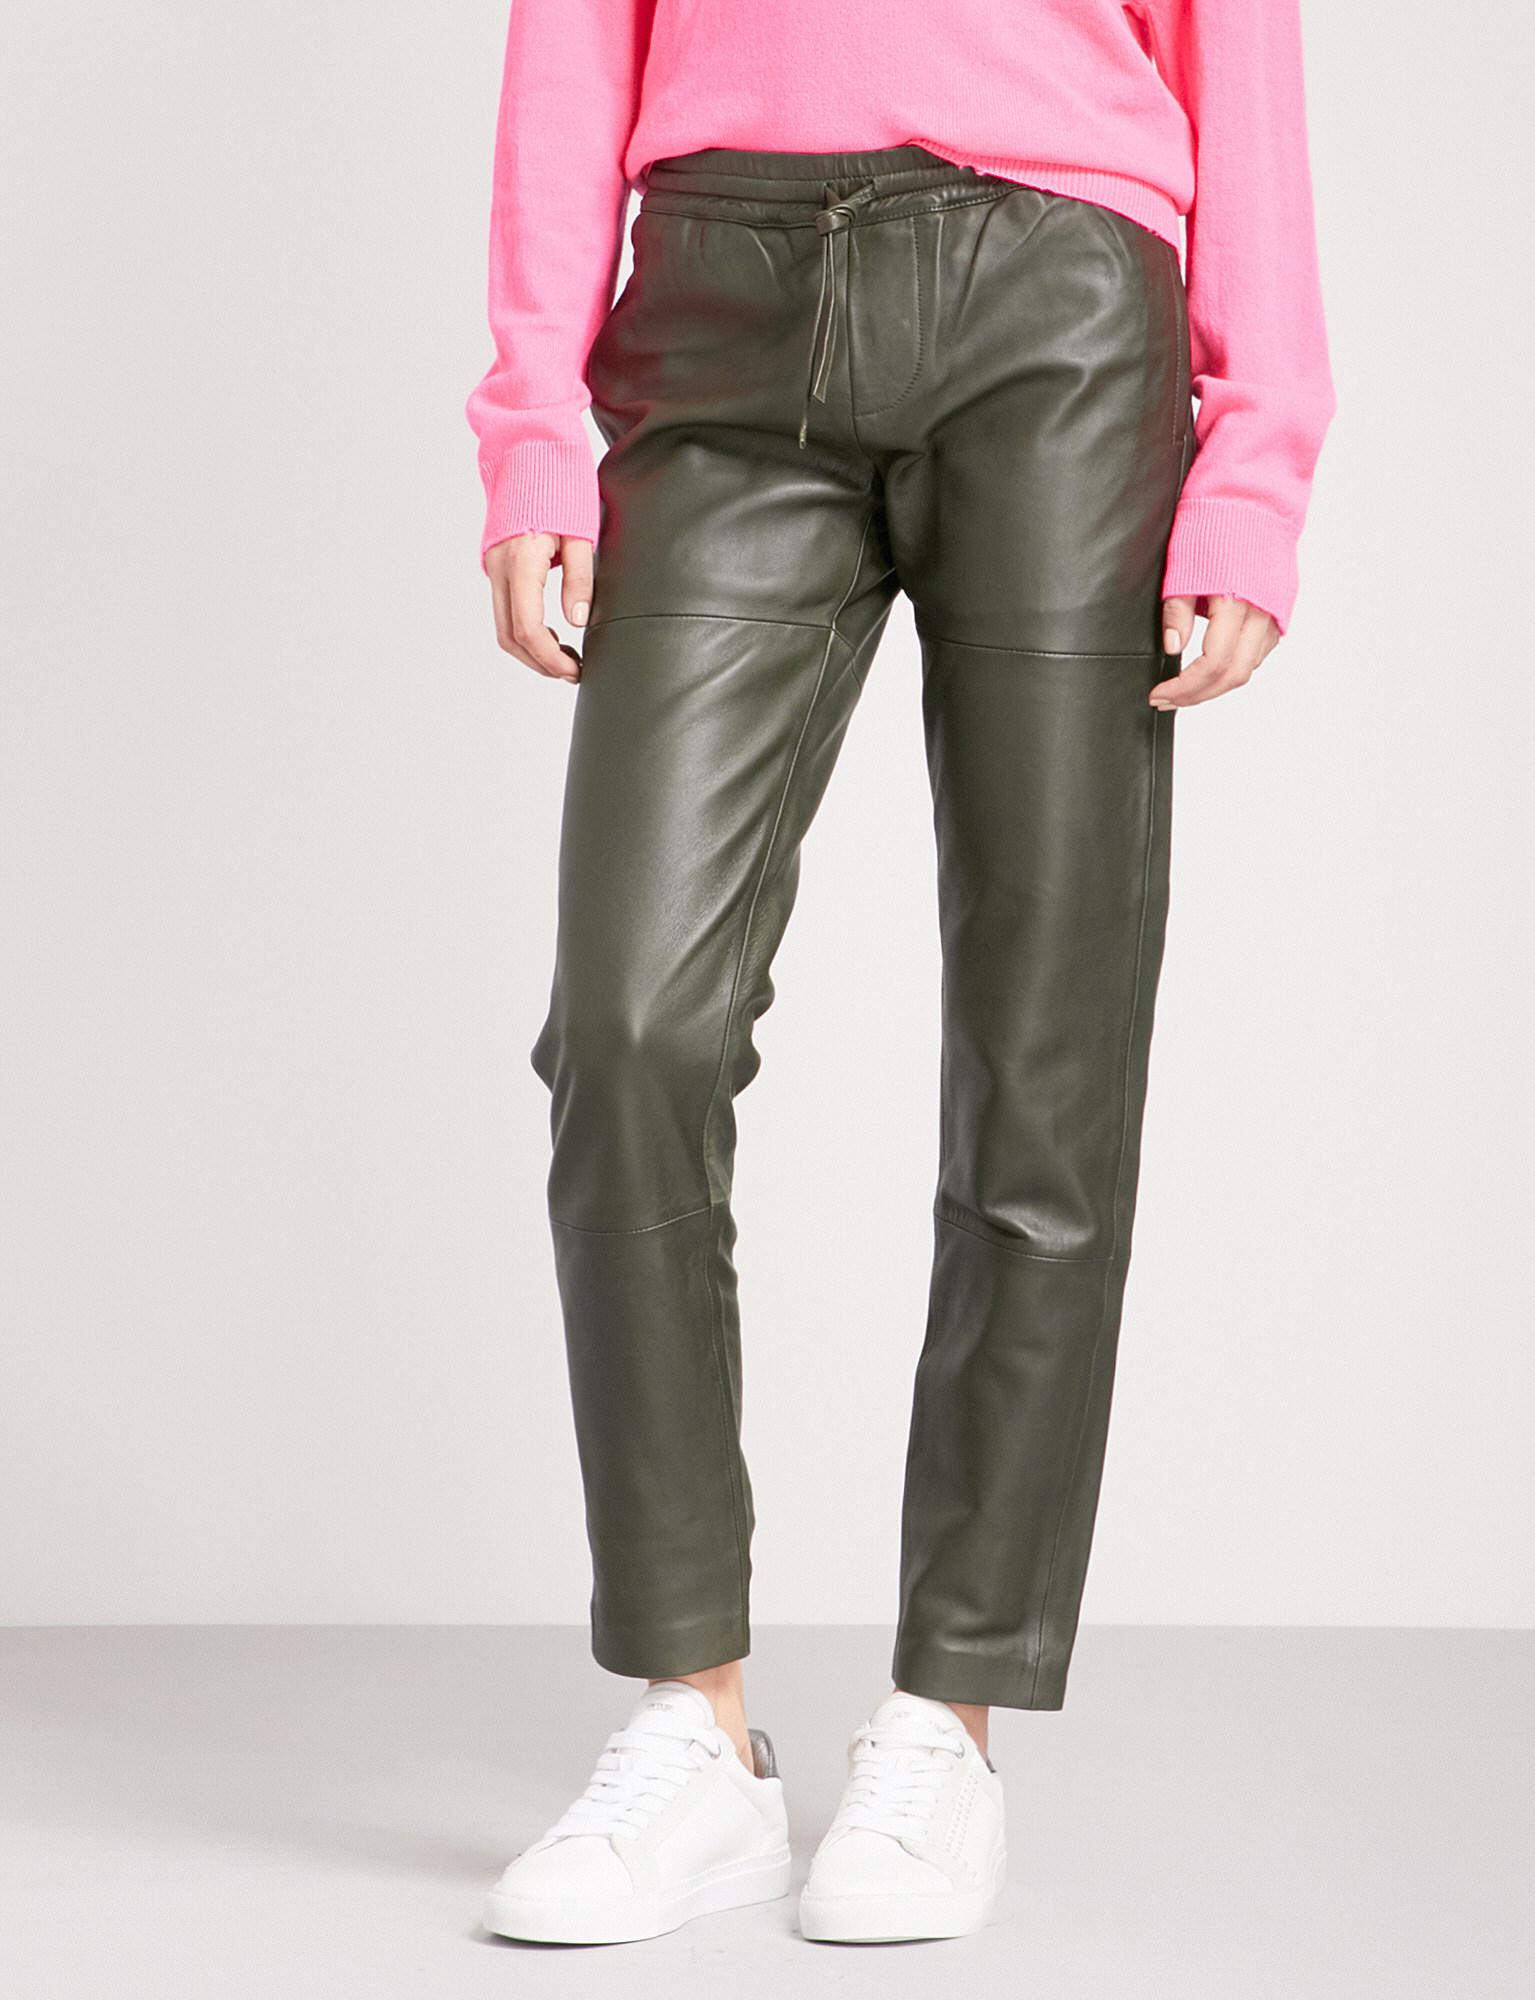 zadig & voltaire leather pants